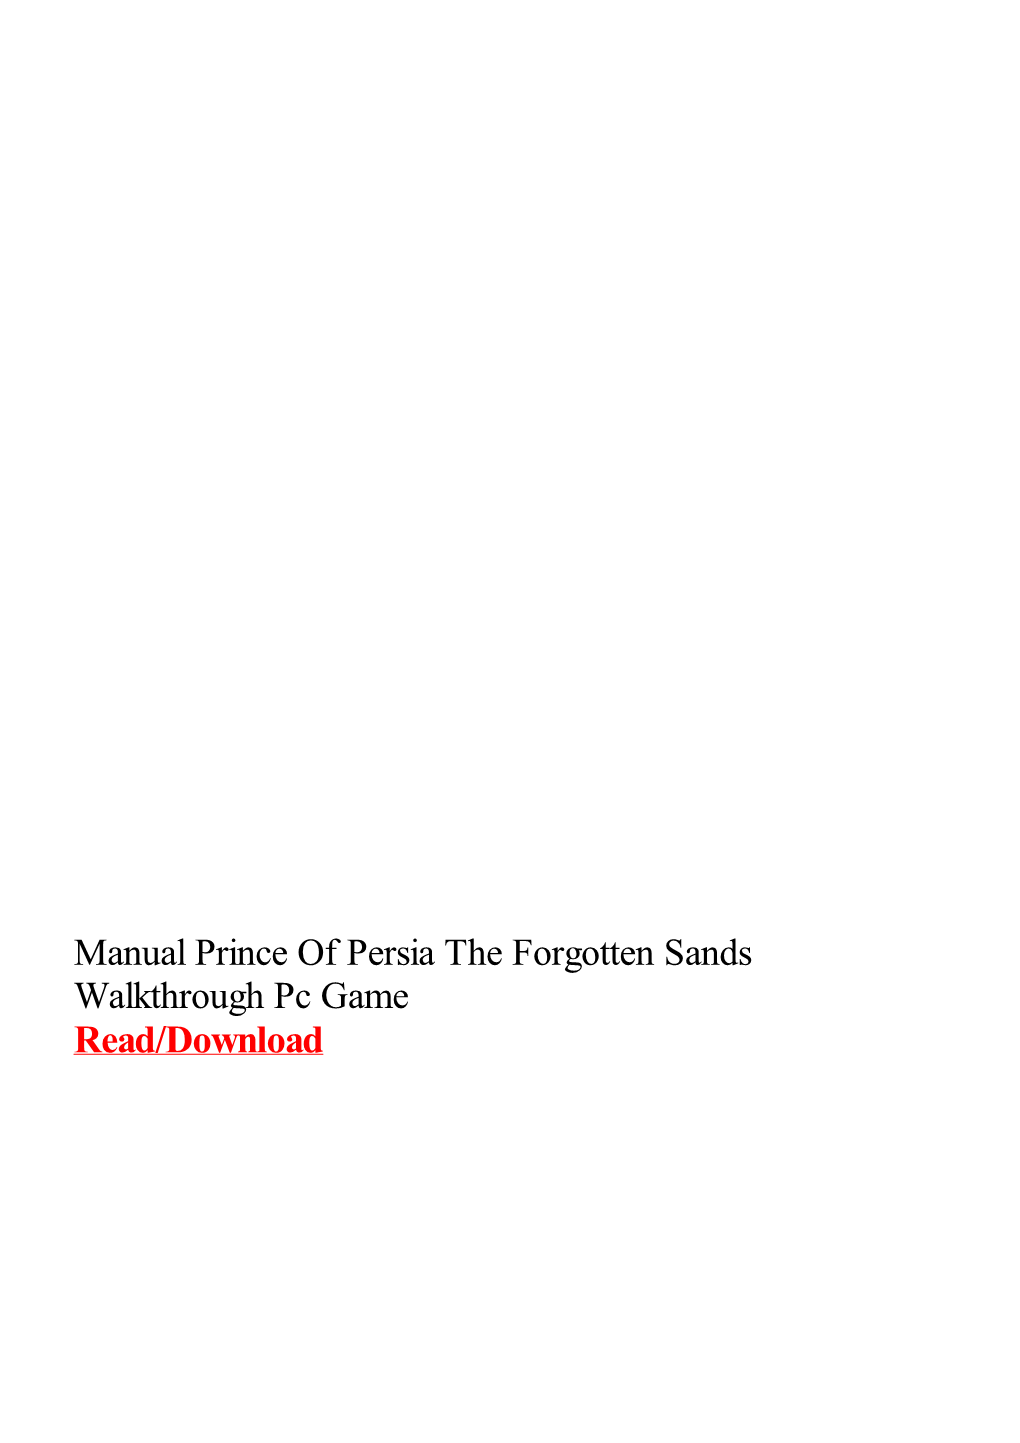 Manual Prince of Persia the Forgotten Sands Walkthrough Pc Game